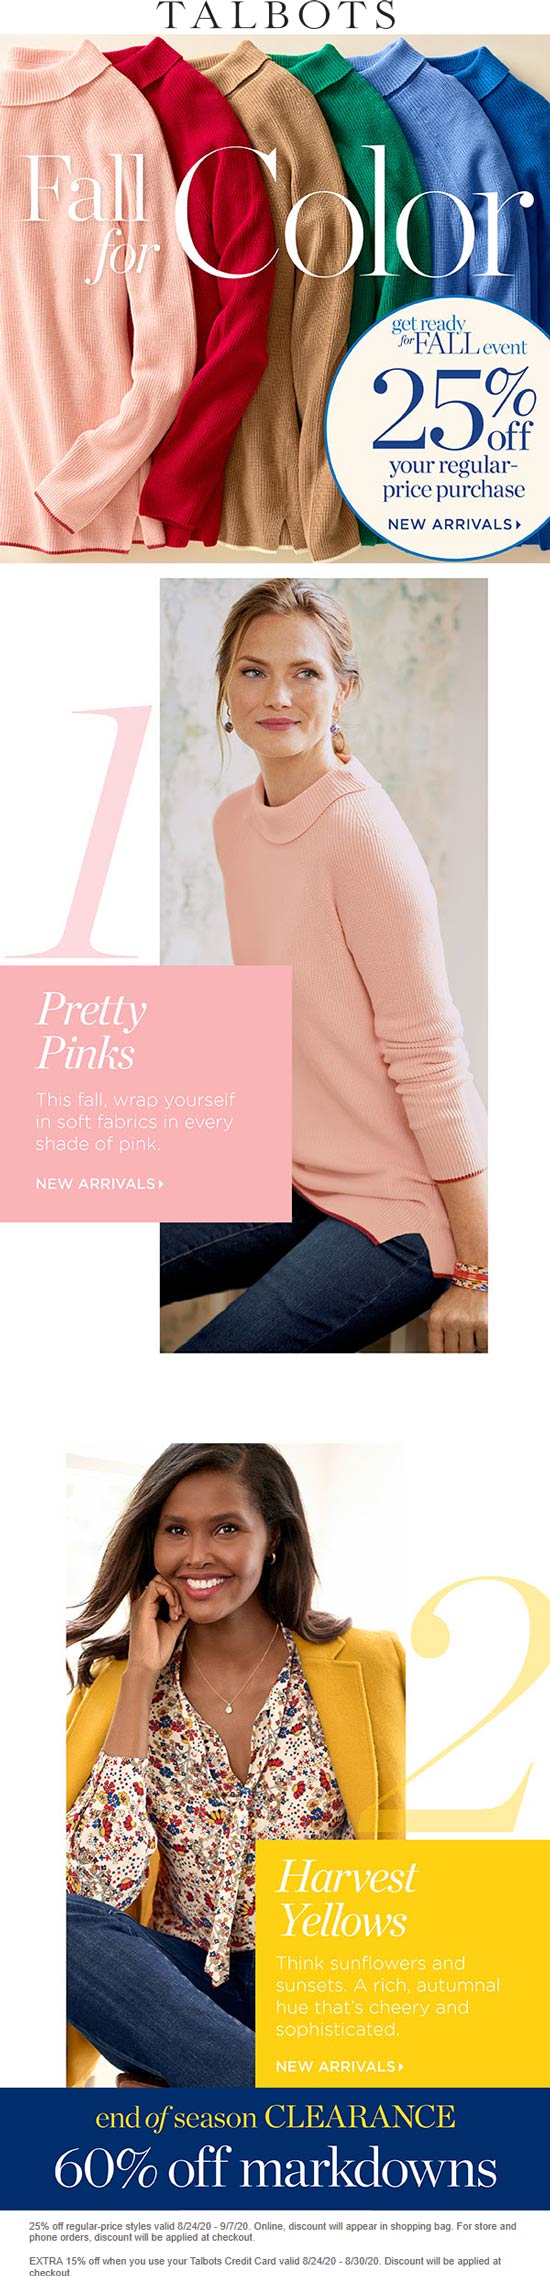 Talbots stores Coupon  25% off at Talbots, ditto online #talbots 